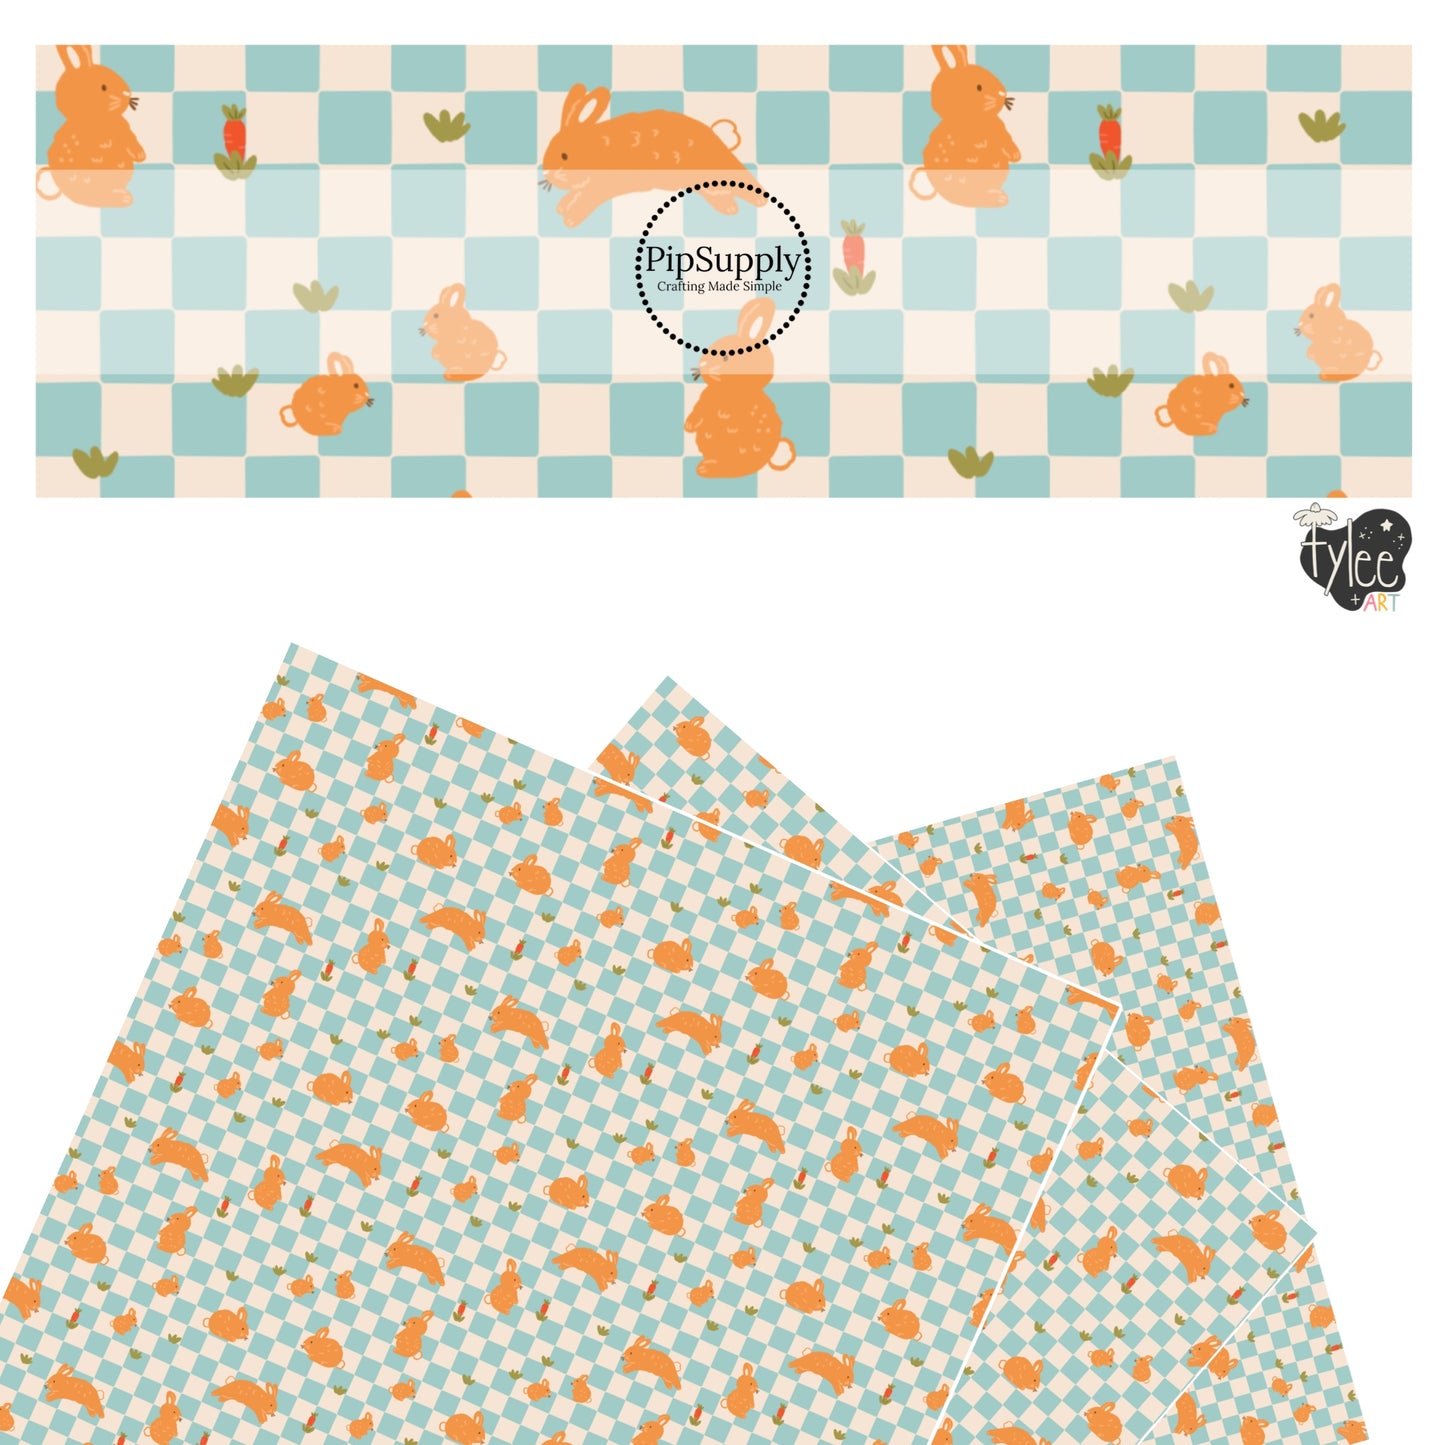 These pastel checkered pattern faux leather sheets contain the following design elements: bunnies and tiny flowers on light blue and cream checkered pattern. Our CPSIA compliant faux leather sheets or rolls can be used for all types of crafting projects. 